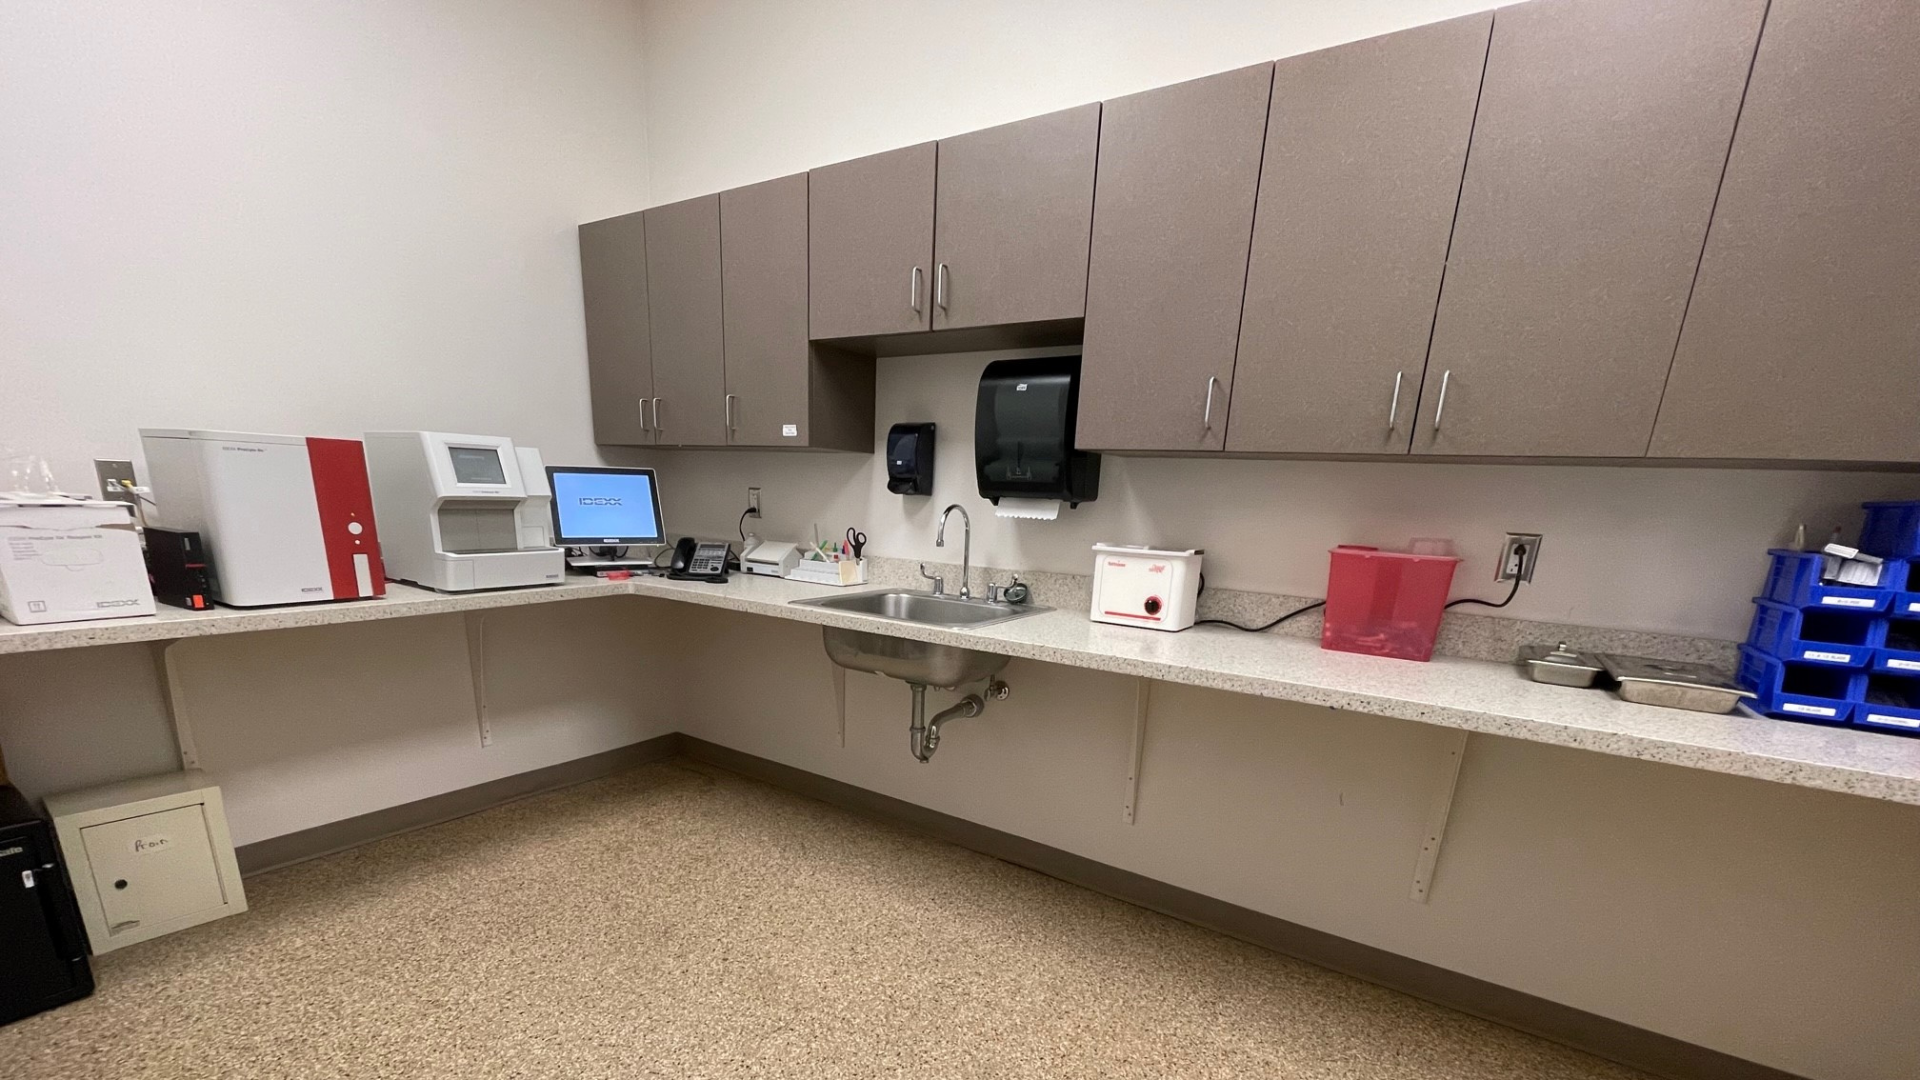 Hillside Veterinary Associates lab and surgical room